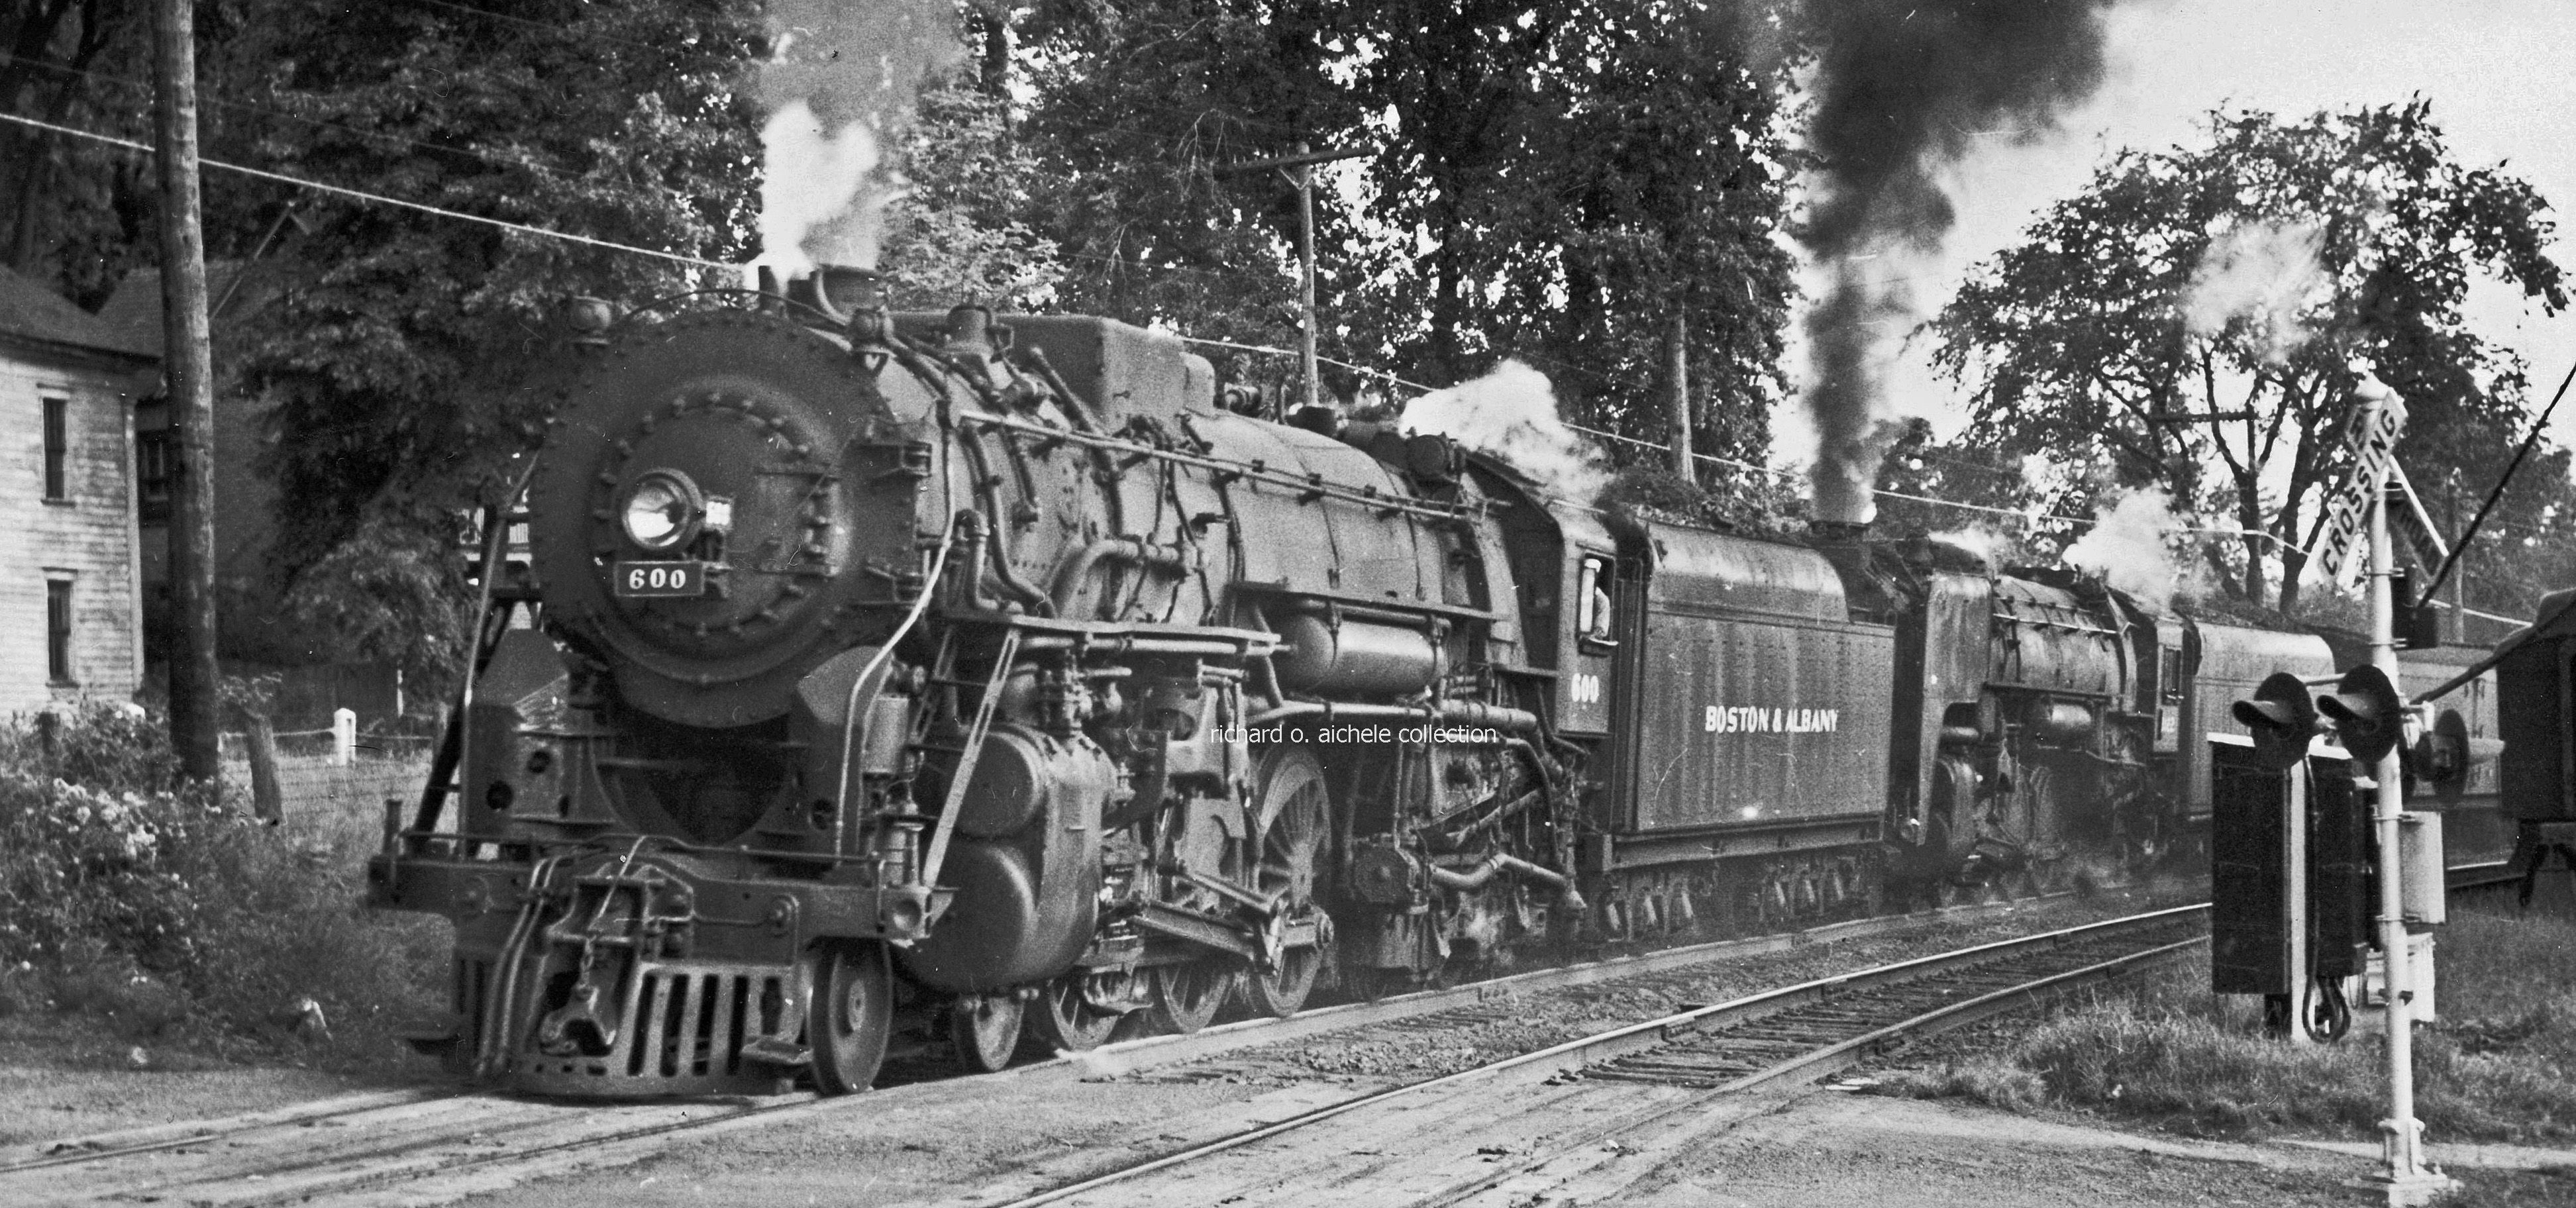 American Steam Trains In The 1940s And 1950s Northeastern rail 